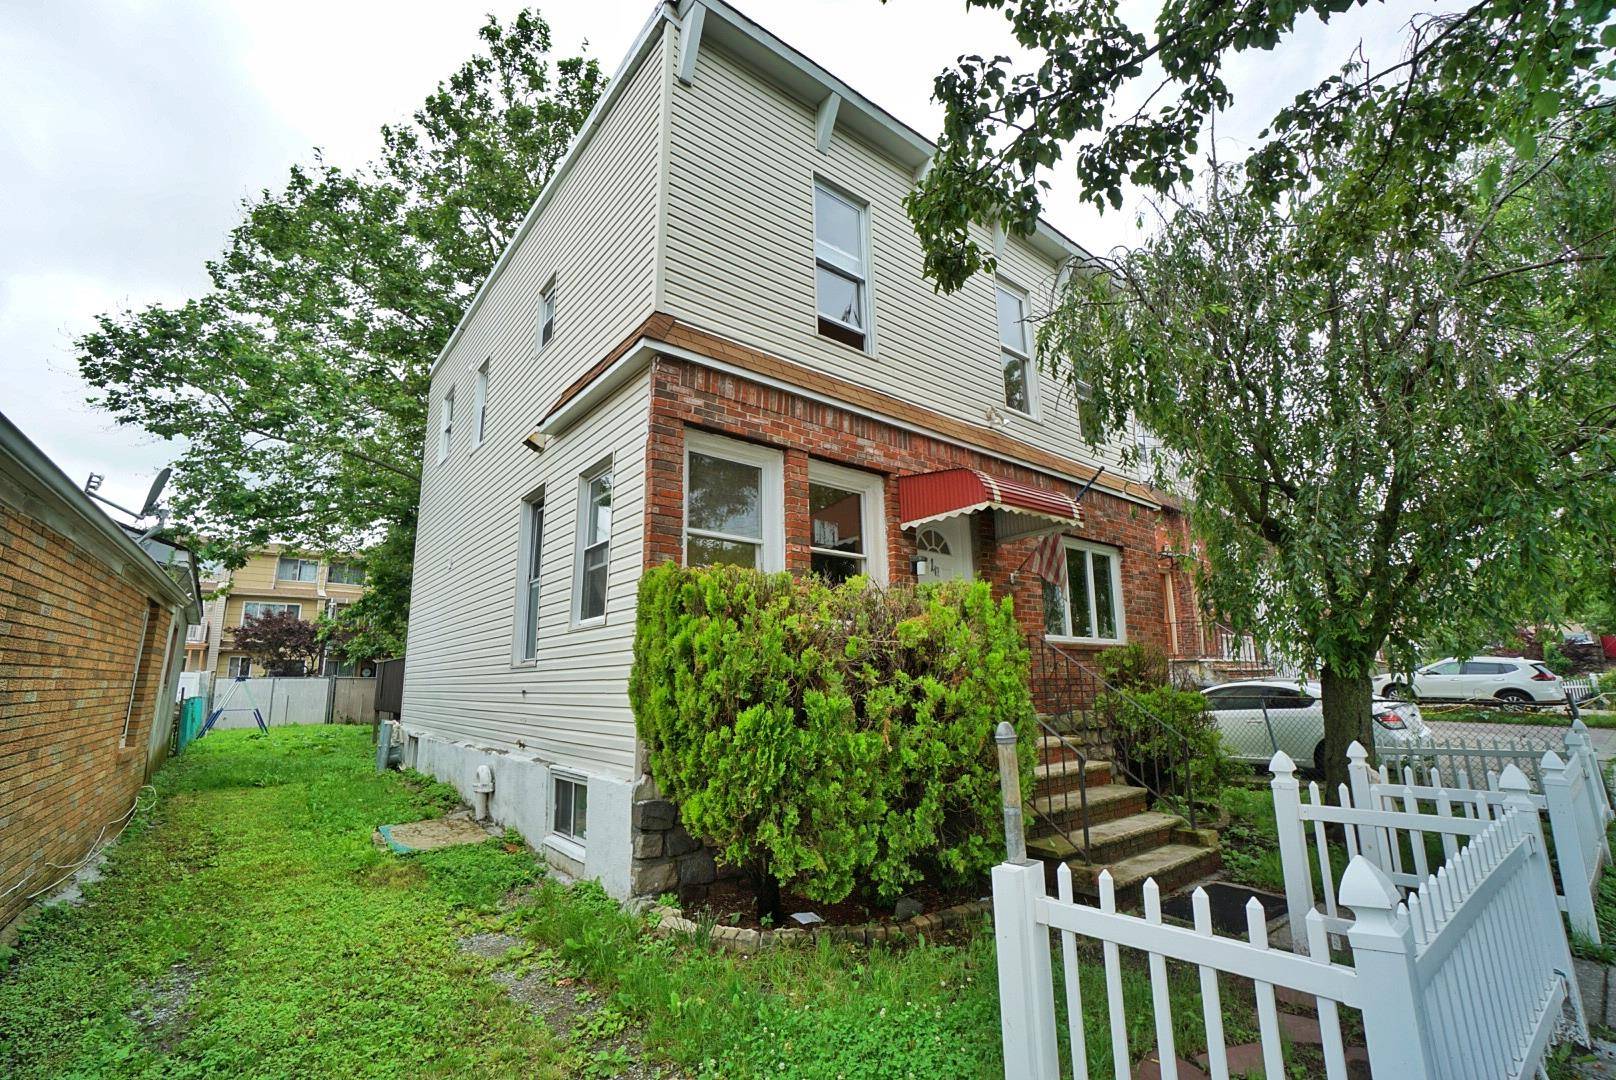 Introducing this beautiful two family house located in the heart of New Dorp Beach.